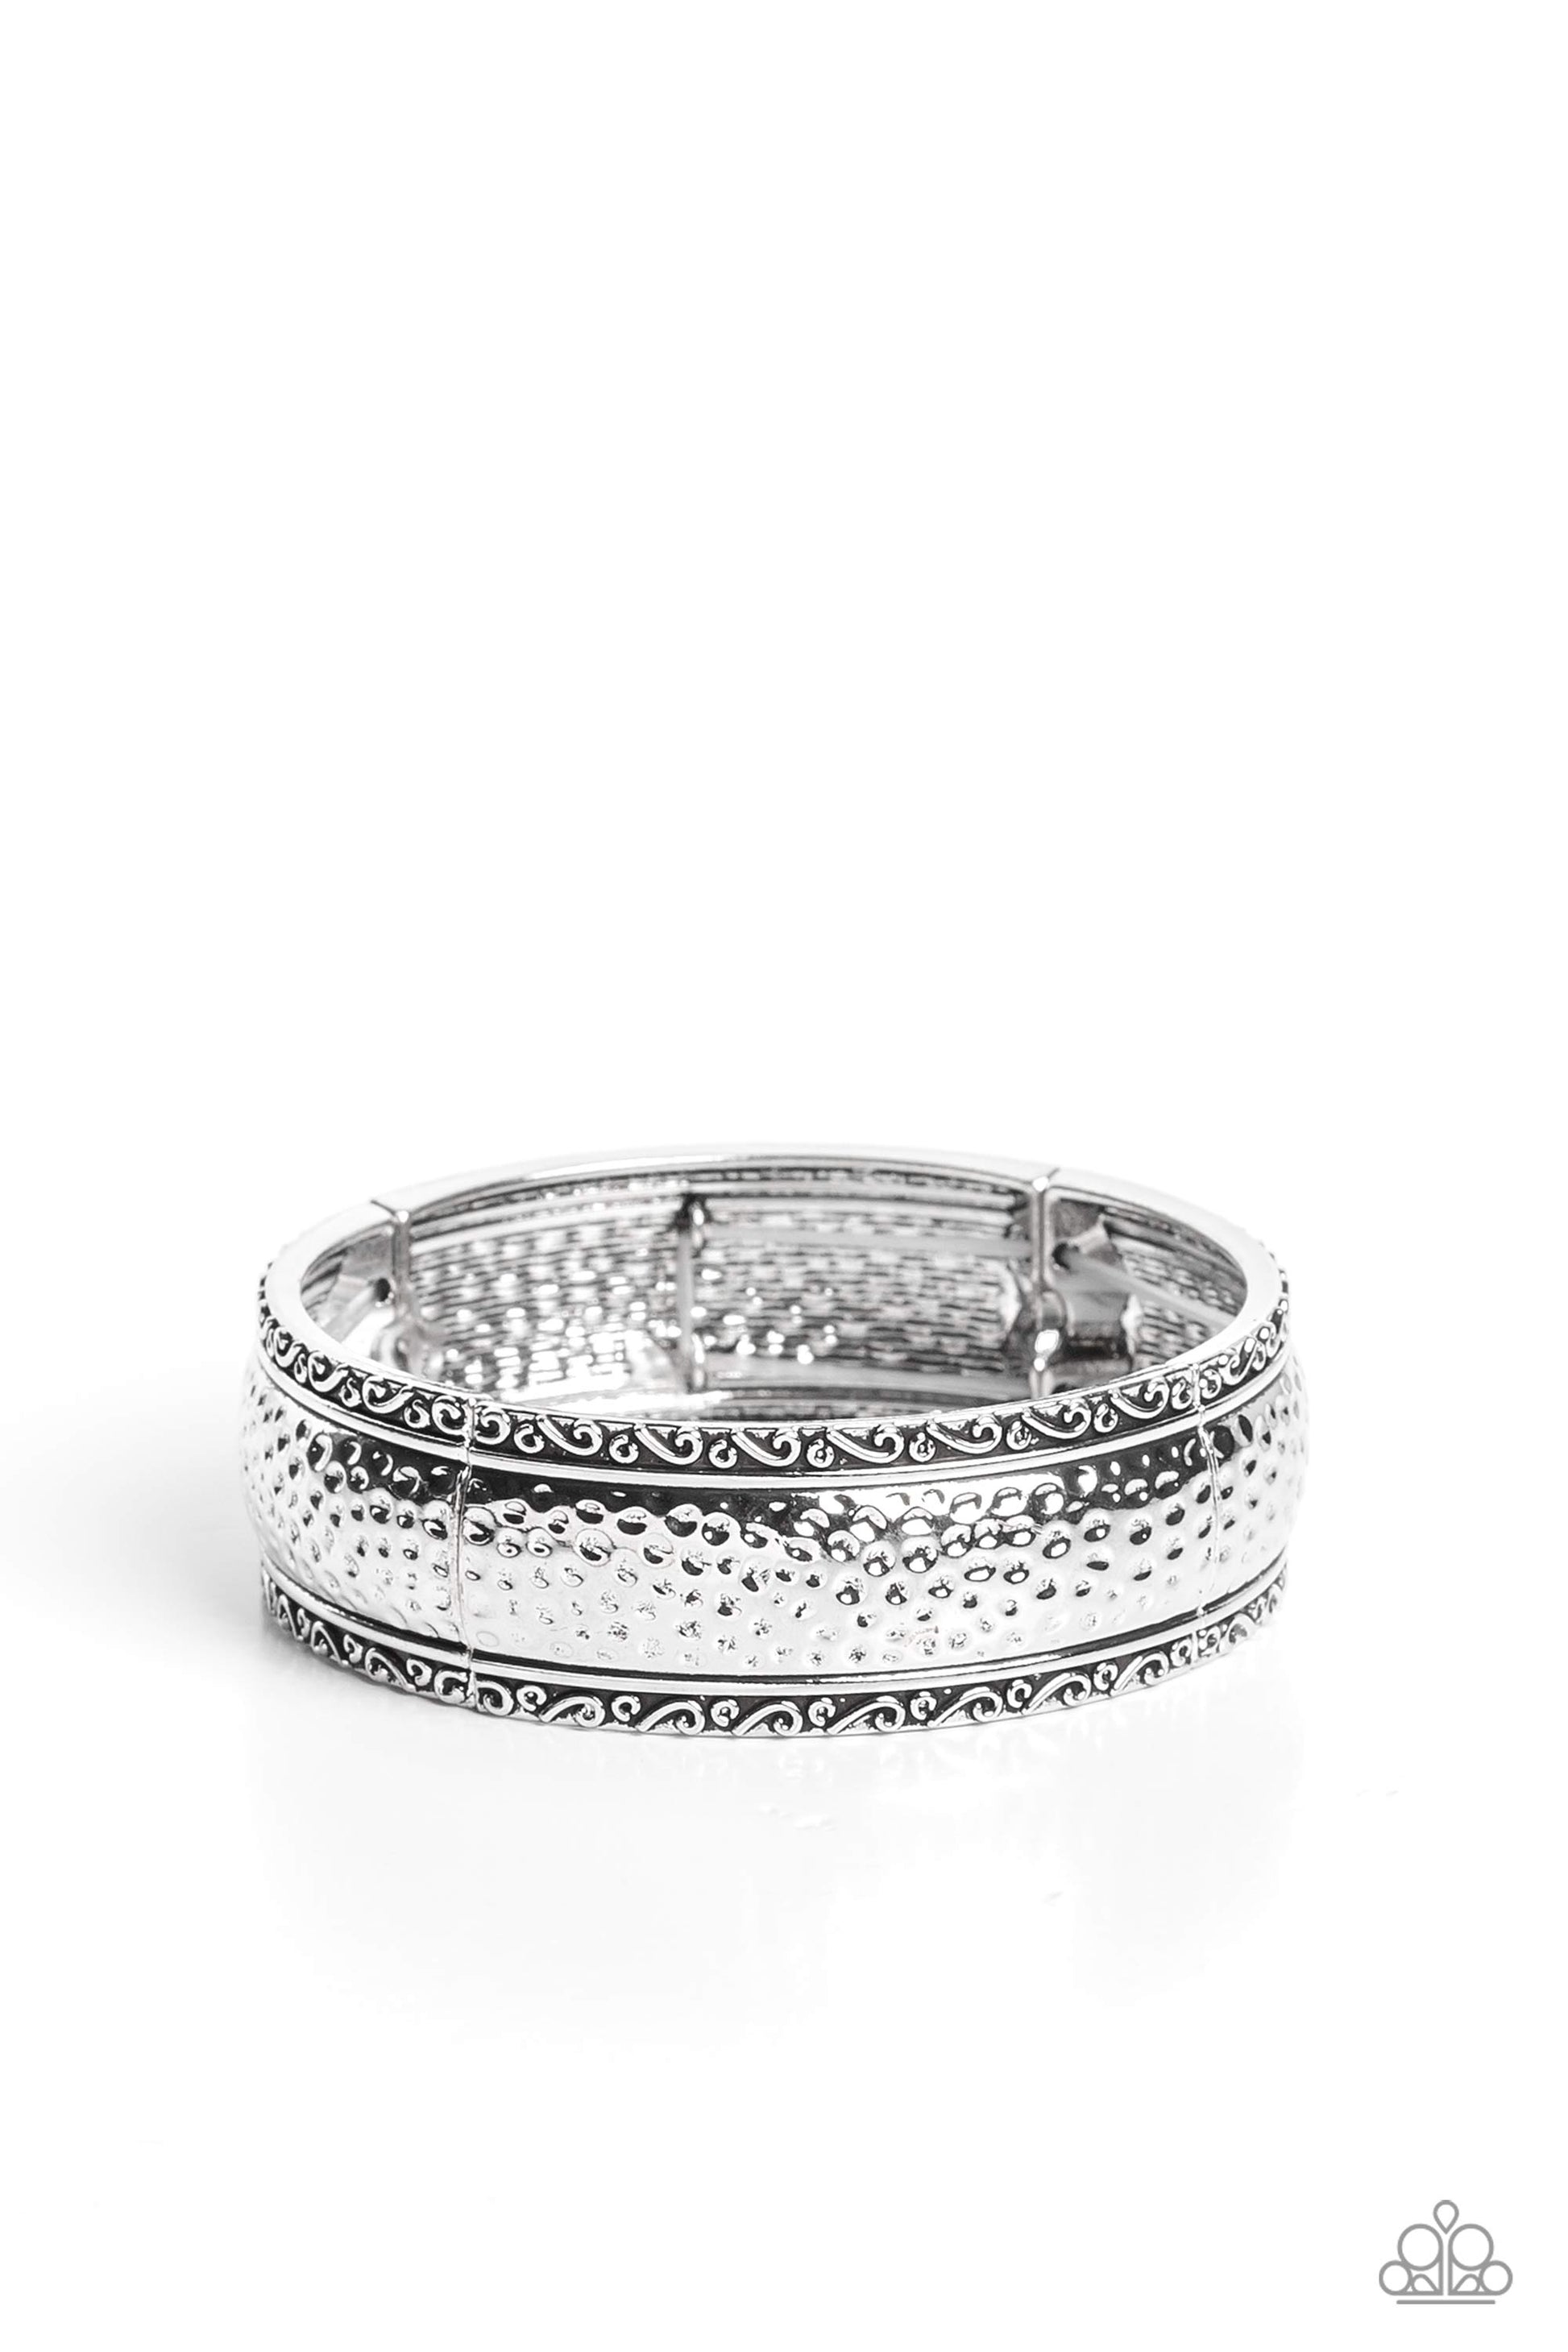 Paparazzi Accessories - Textile Tenor - Silver Bracelet curved frames of high-sheen silver curve around the wrist on elastic stretchy bands. Studs and ribbons of silver curl into a dainty filigree above and below its hammered center for a soft and dauntless combo.  Sold as one individual bracelet.